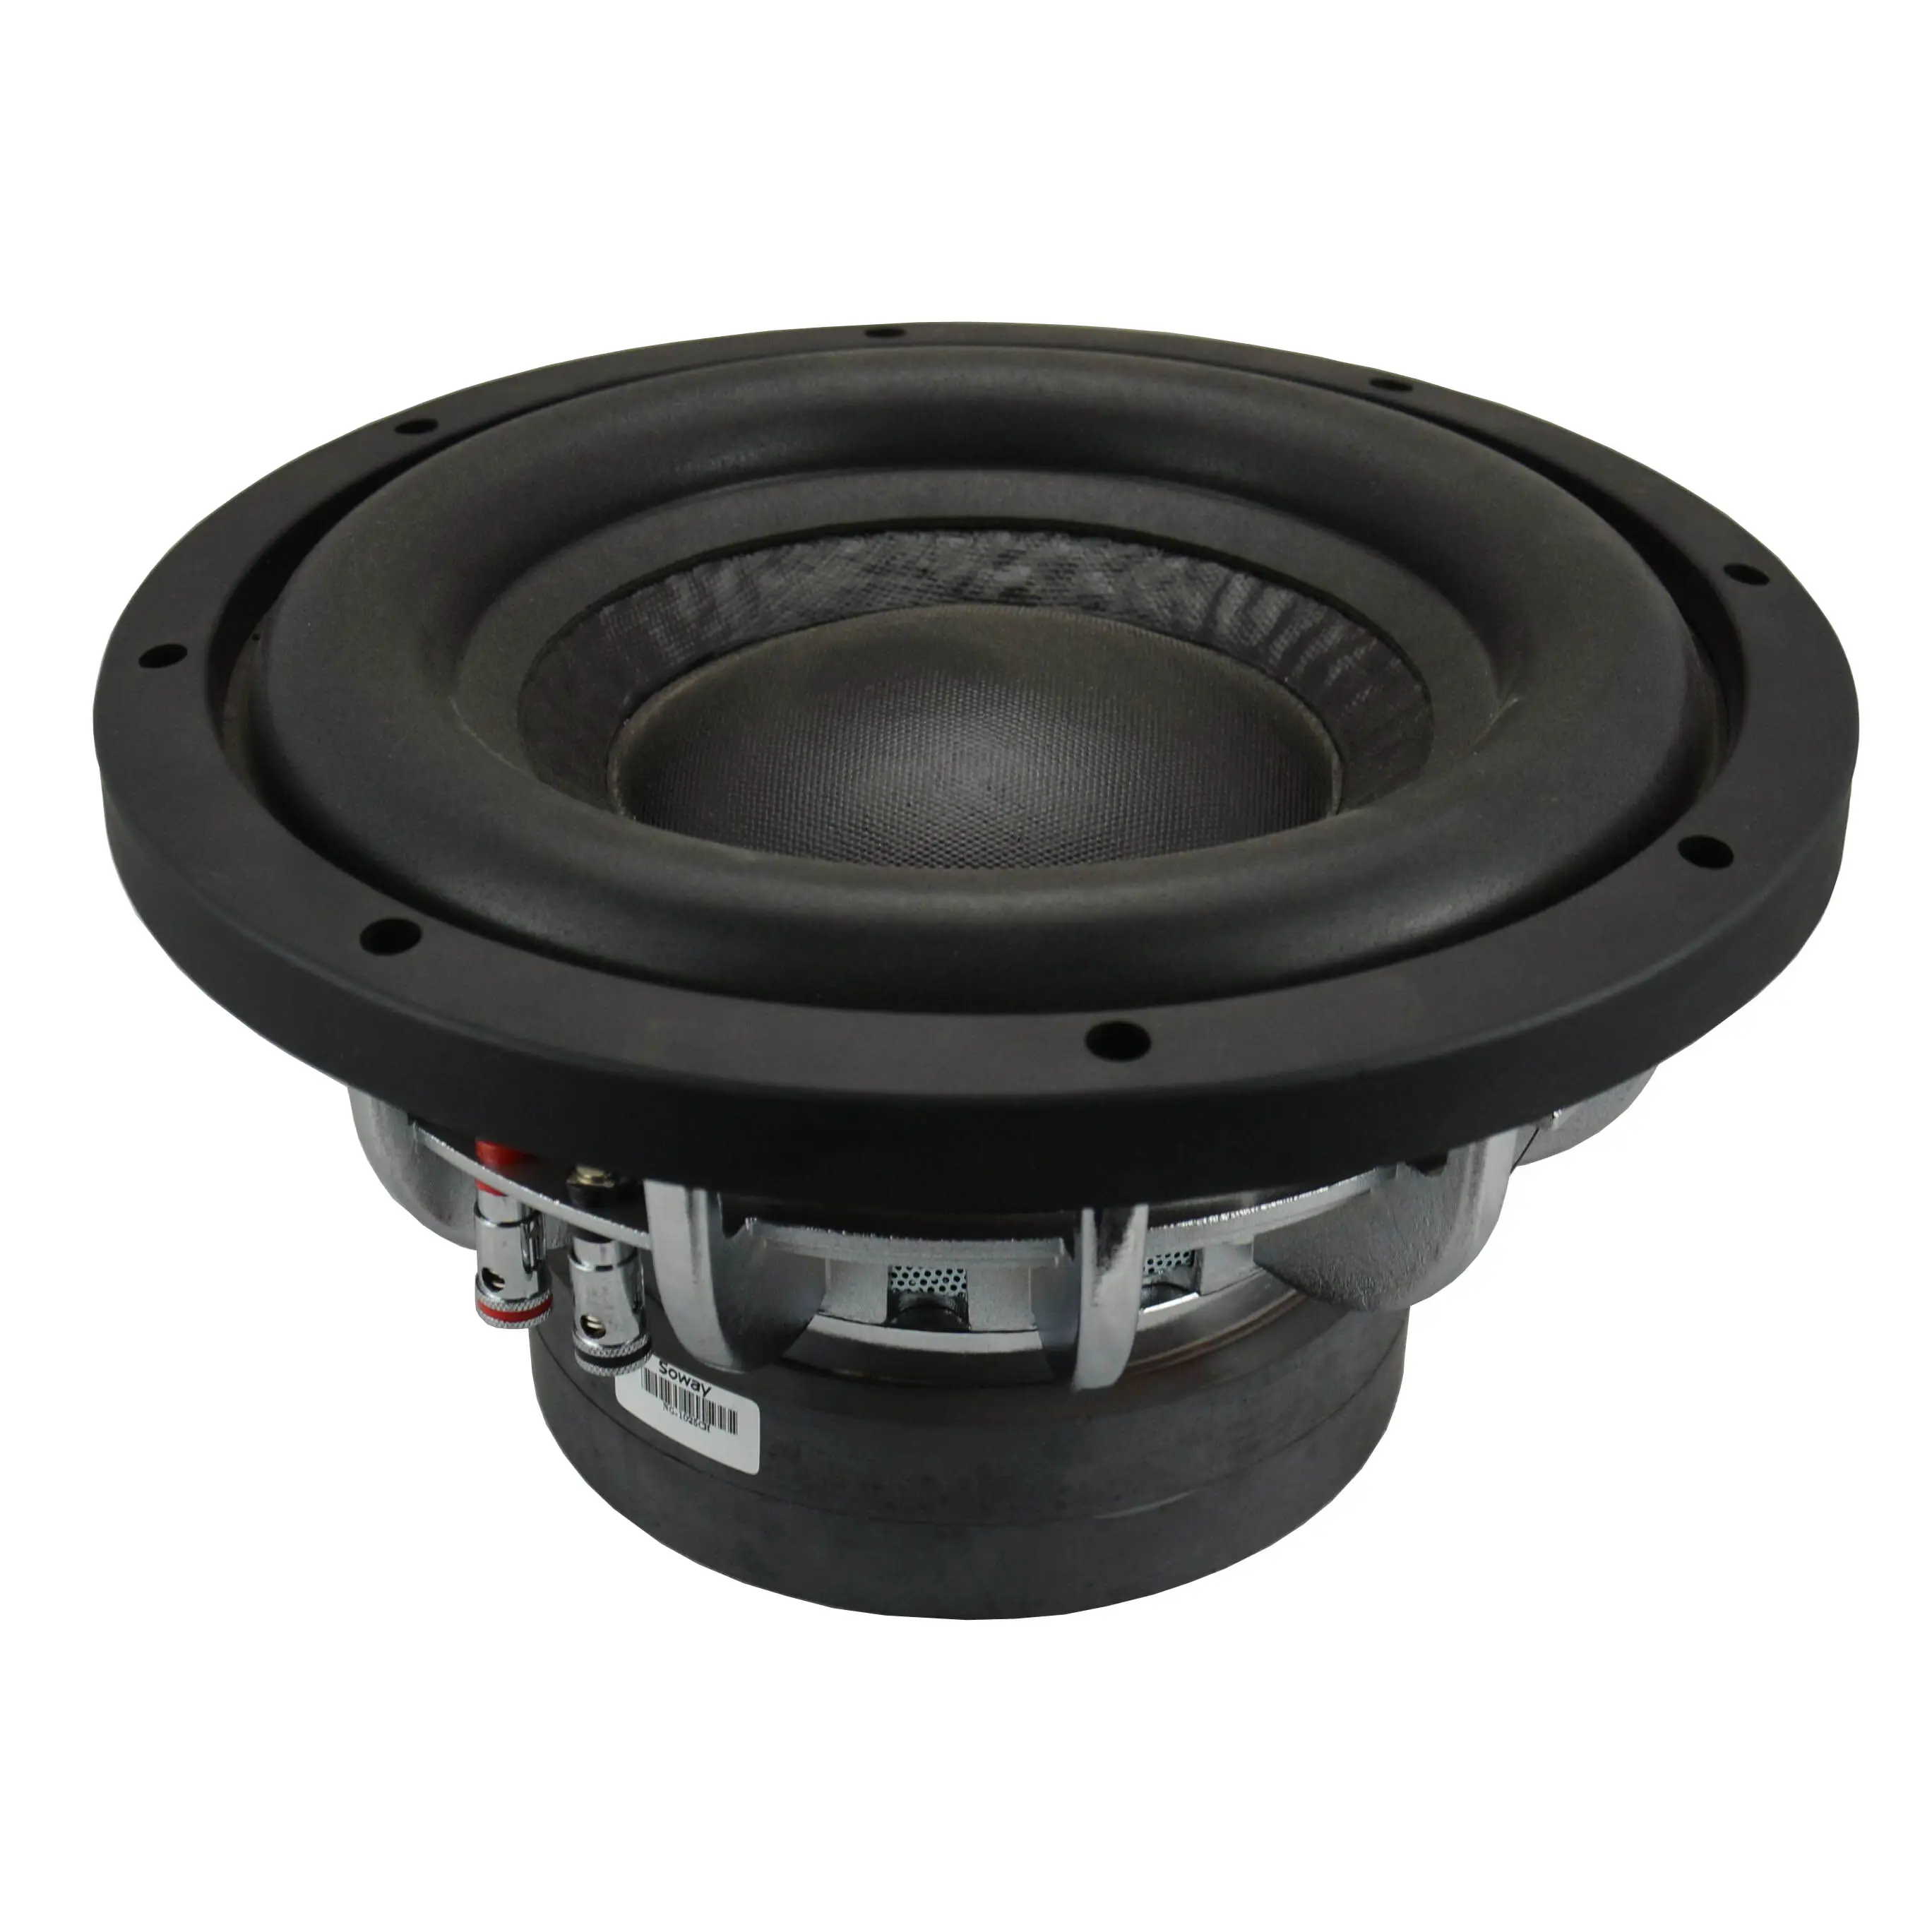 SOWAY beste kwaliteit 10 inch 1500 W papier cone NG-1025CH subwoofer/dubbele magneet subwoofer